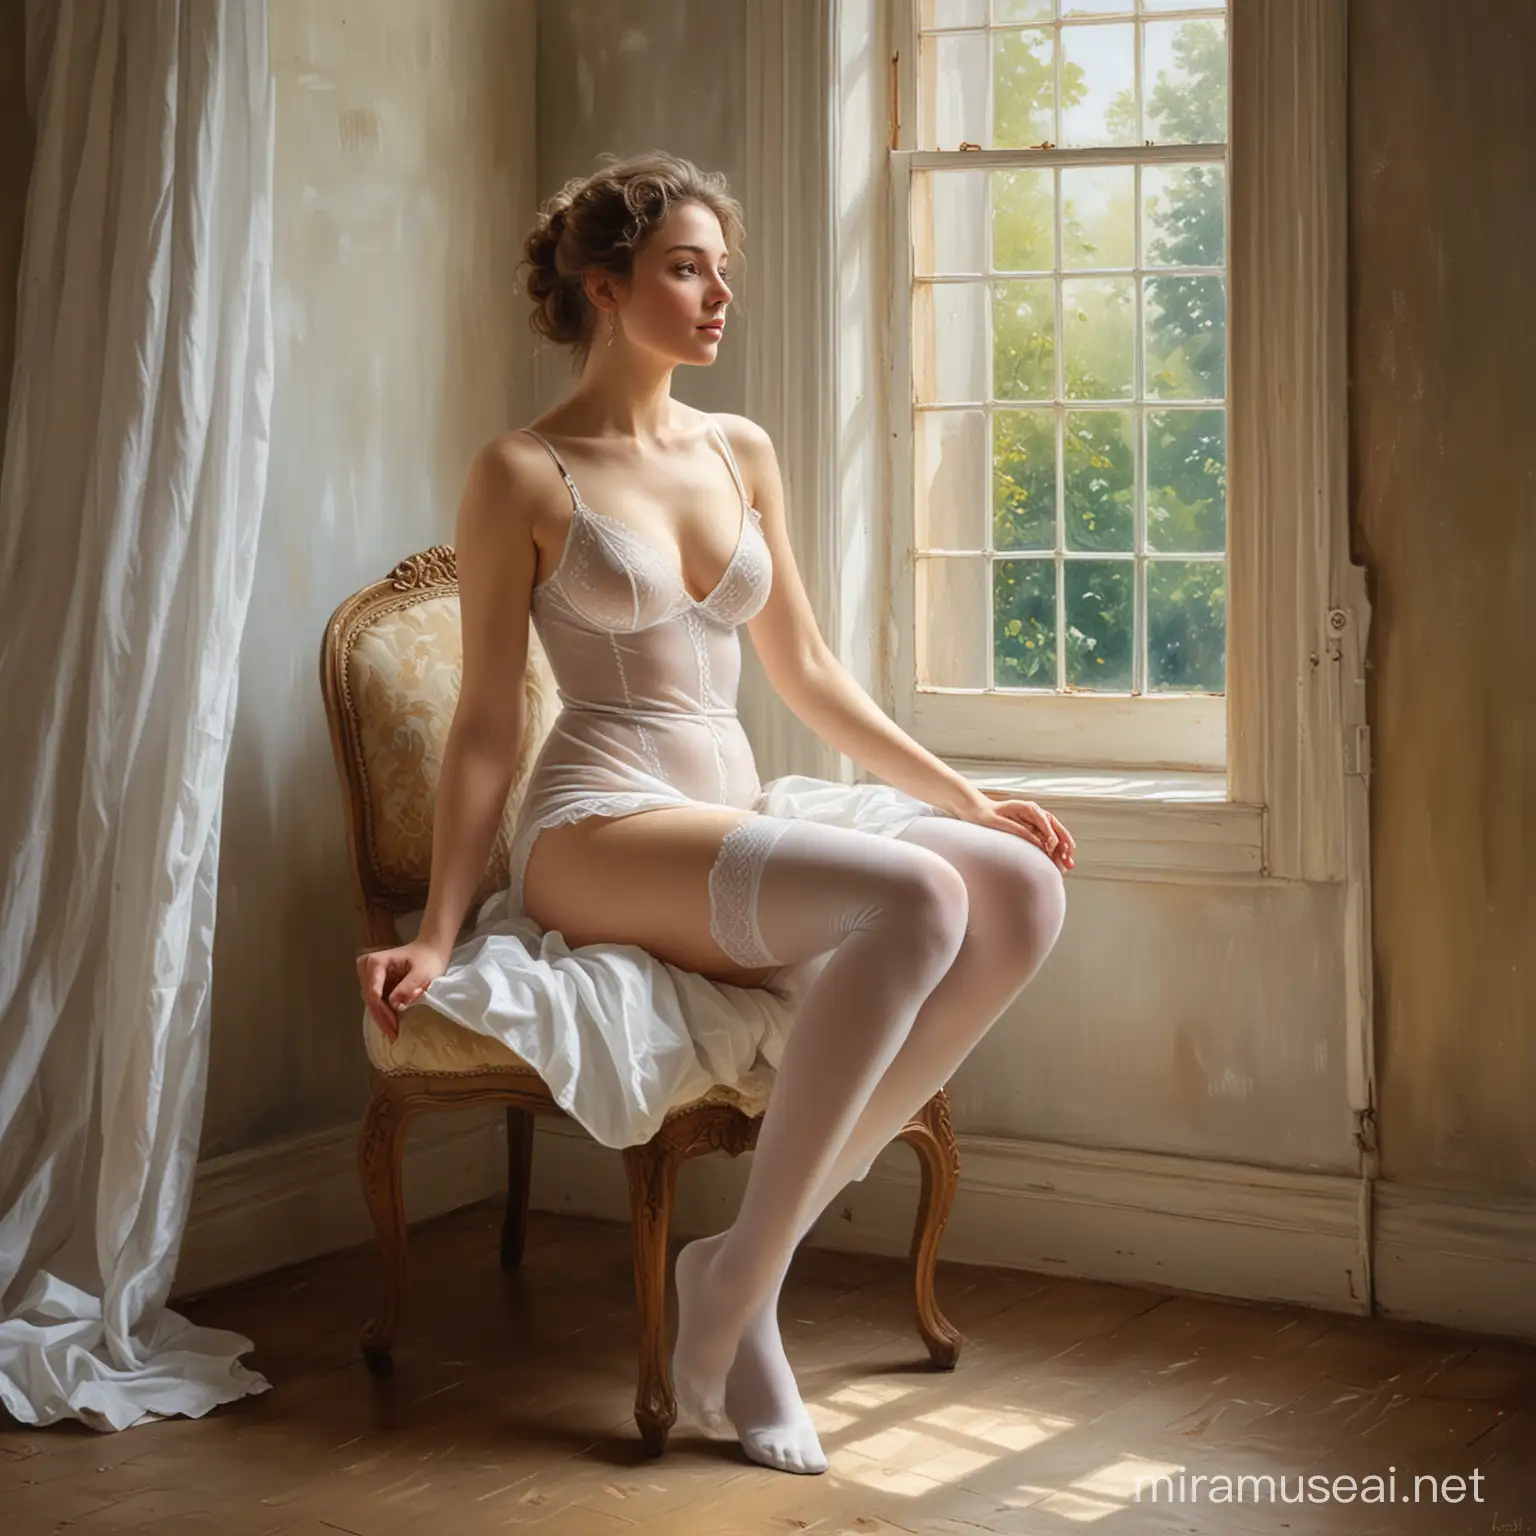 Nude oil painting of a young stunningly beautiful woman with white opaque stockings, sitting in a chair near a small window. Wide angle shot. In the style of Elisabeth Vigee Le Brun.